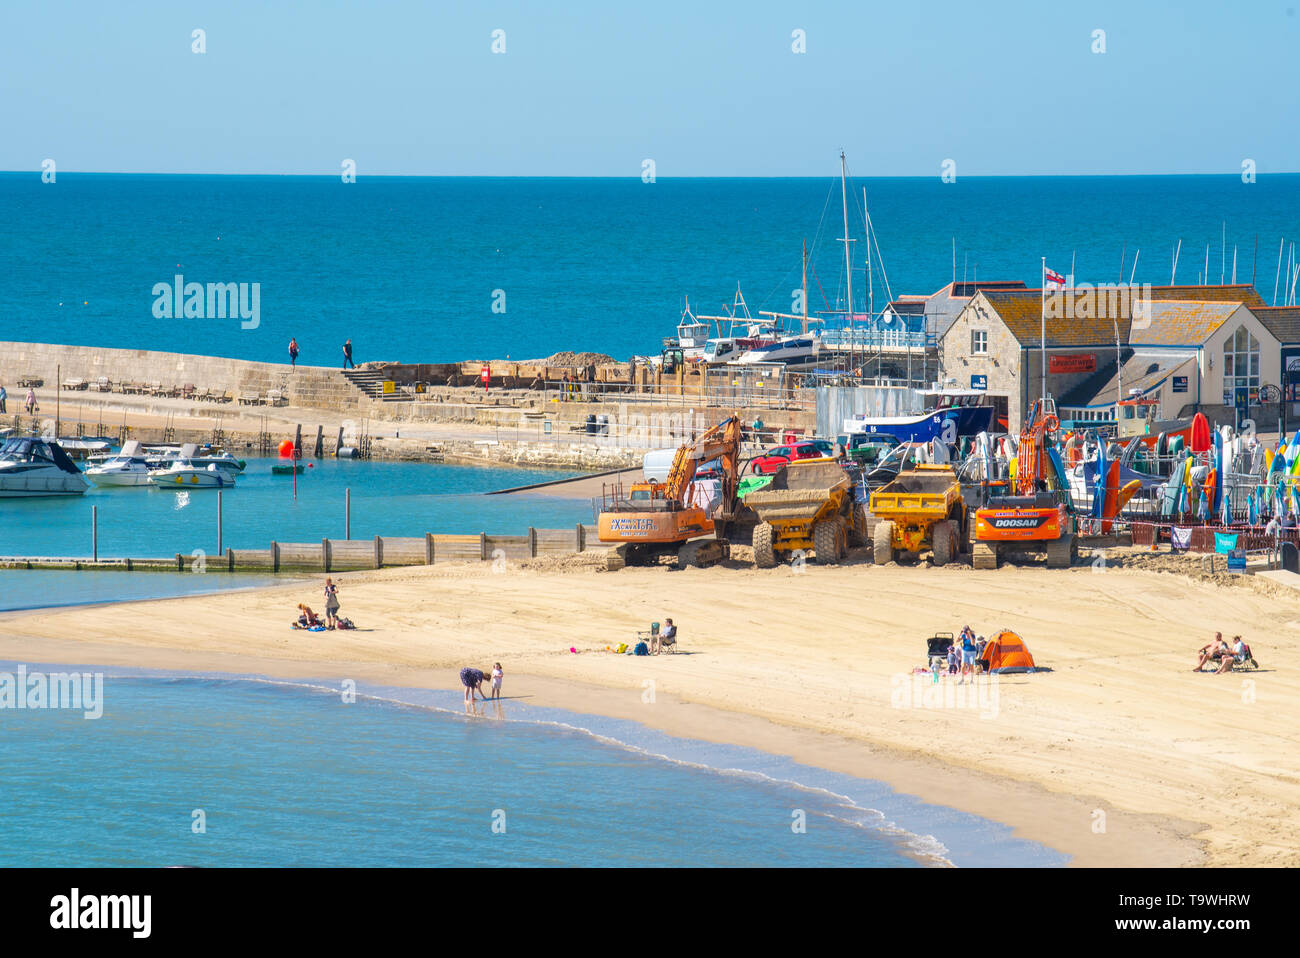 Lyme Regis, Dorset, UK. 21st May 2019. UK Weather: A beautiful morning of hot sunshine and bright blue skies at the seaside resort of Lyme Regis. Visitors enjoy the glorious sunny weather which is set to continue for the rest of the week.  Credit: Celia McMahon/Alamy Live News. Stock Photo